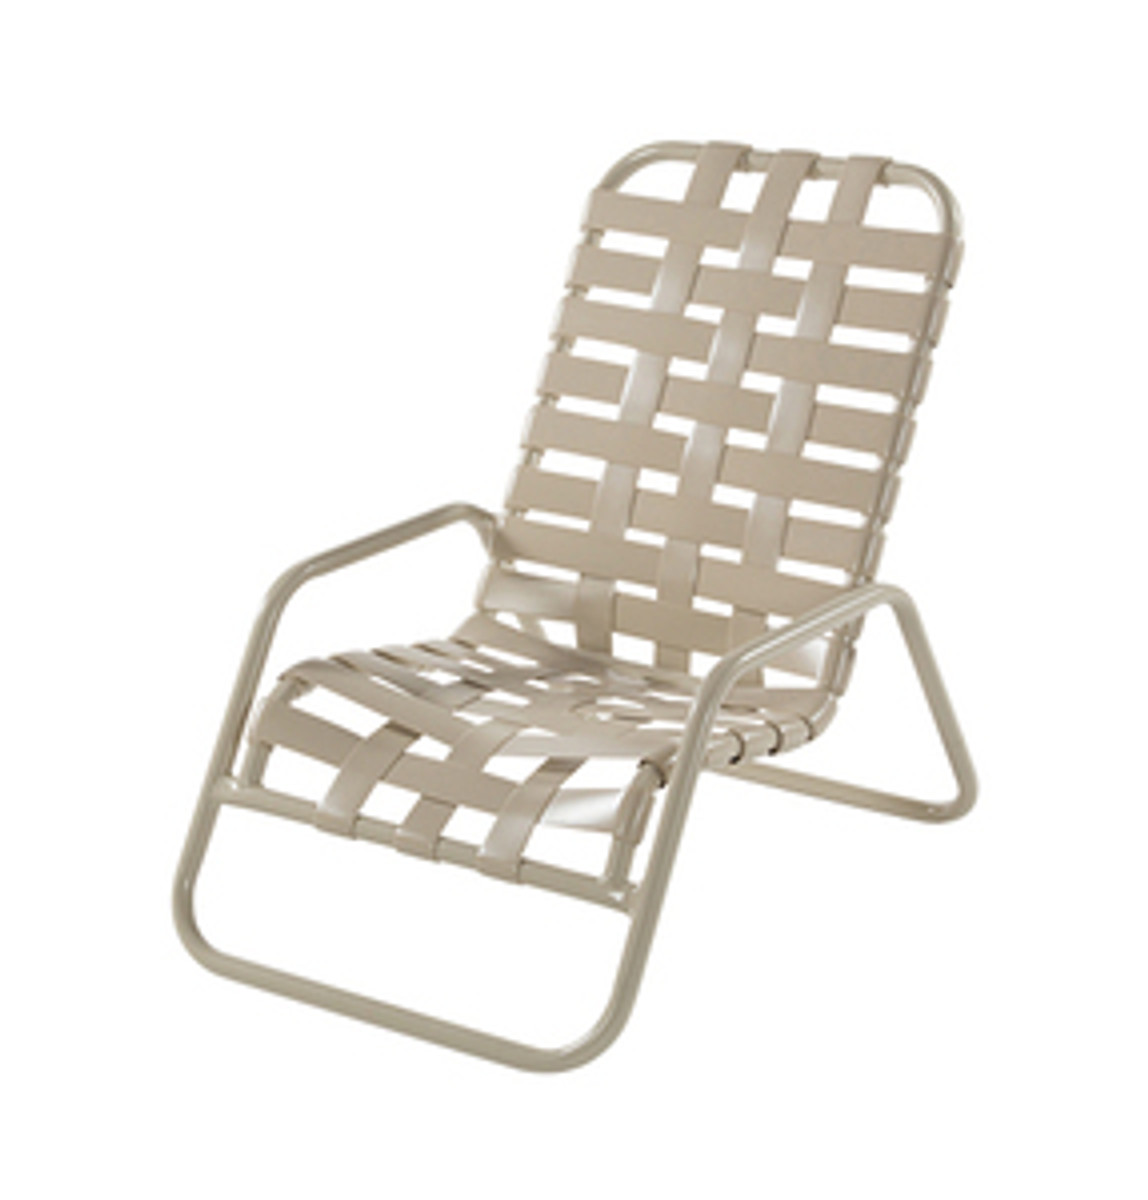 Country Club Strap CW Sand Chair